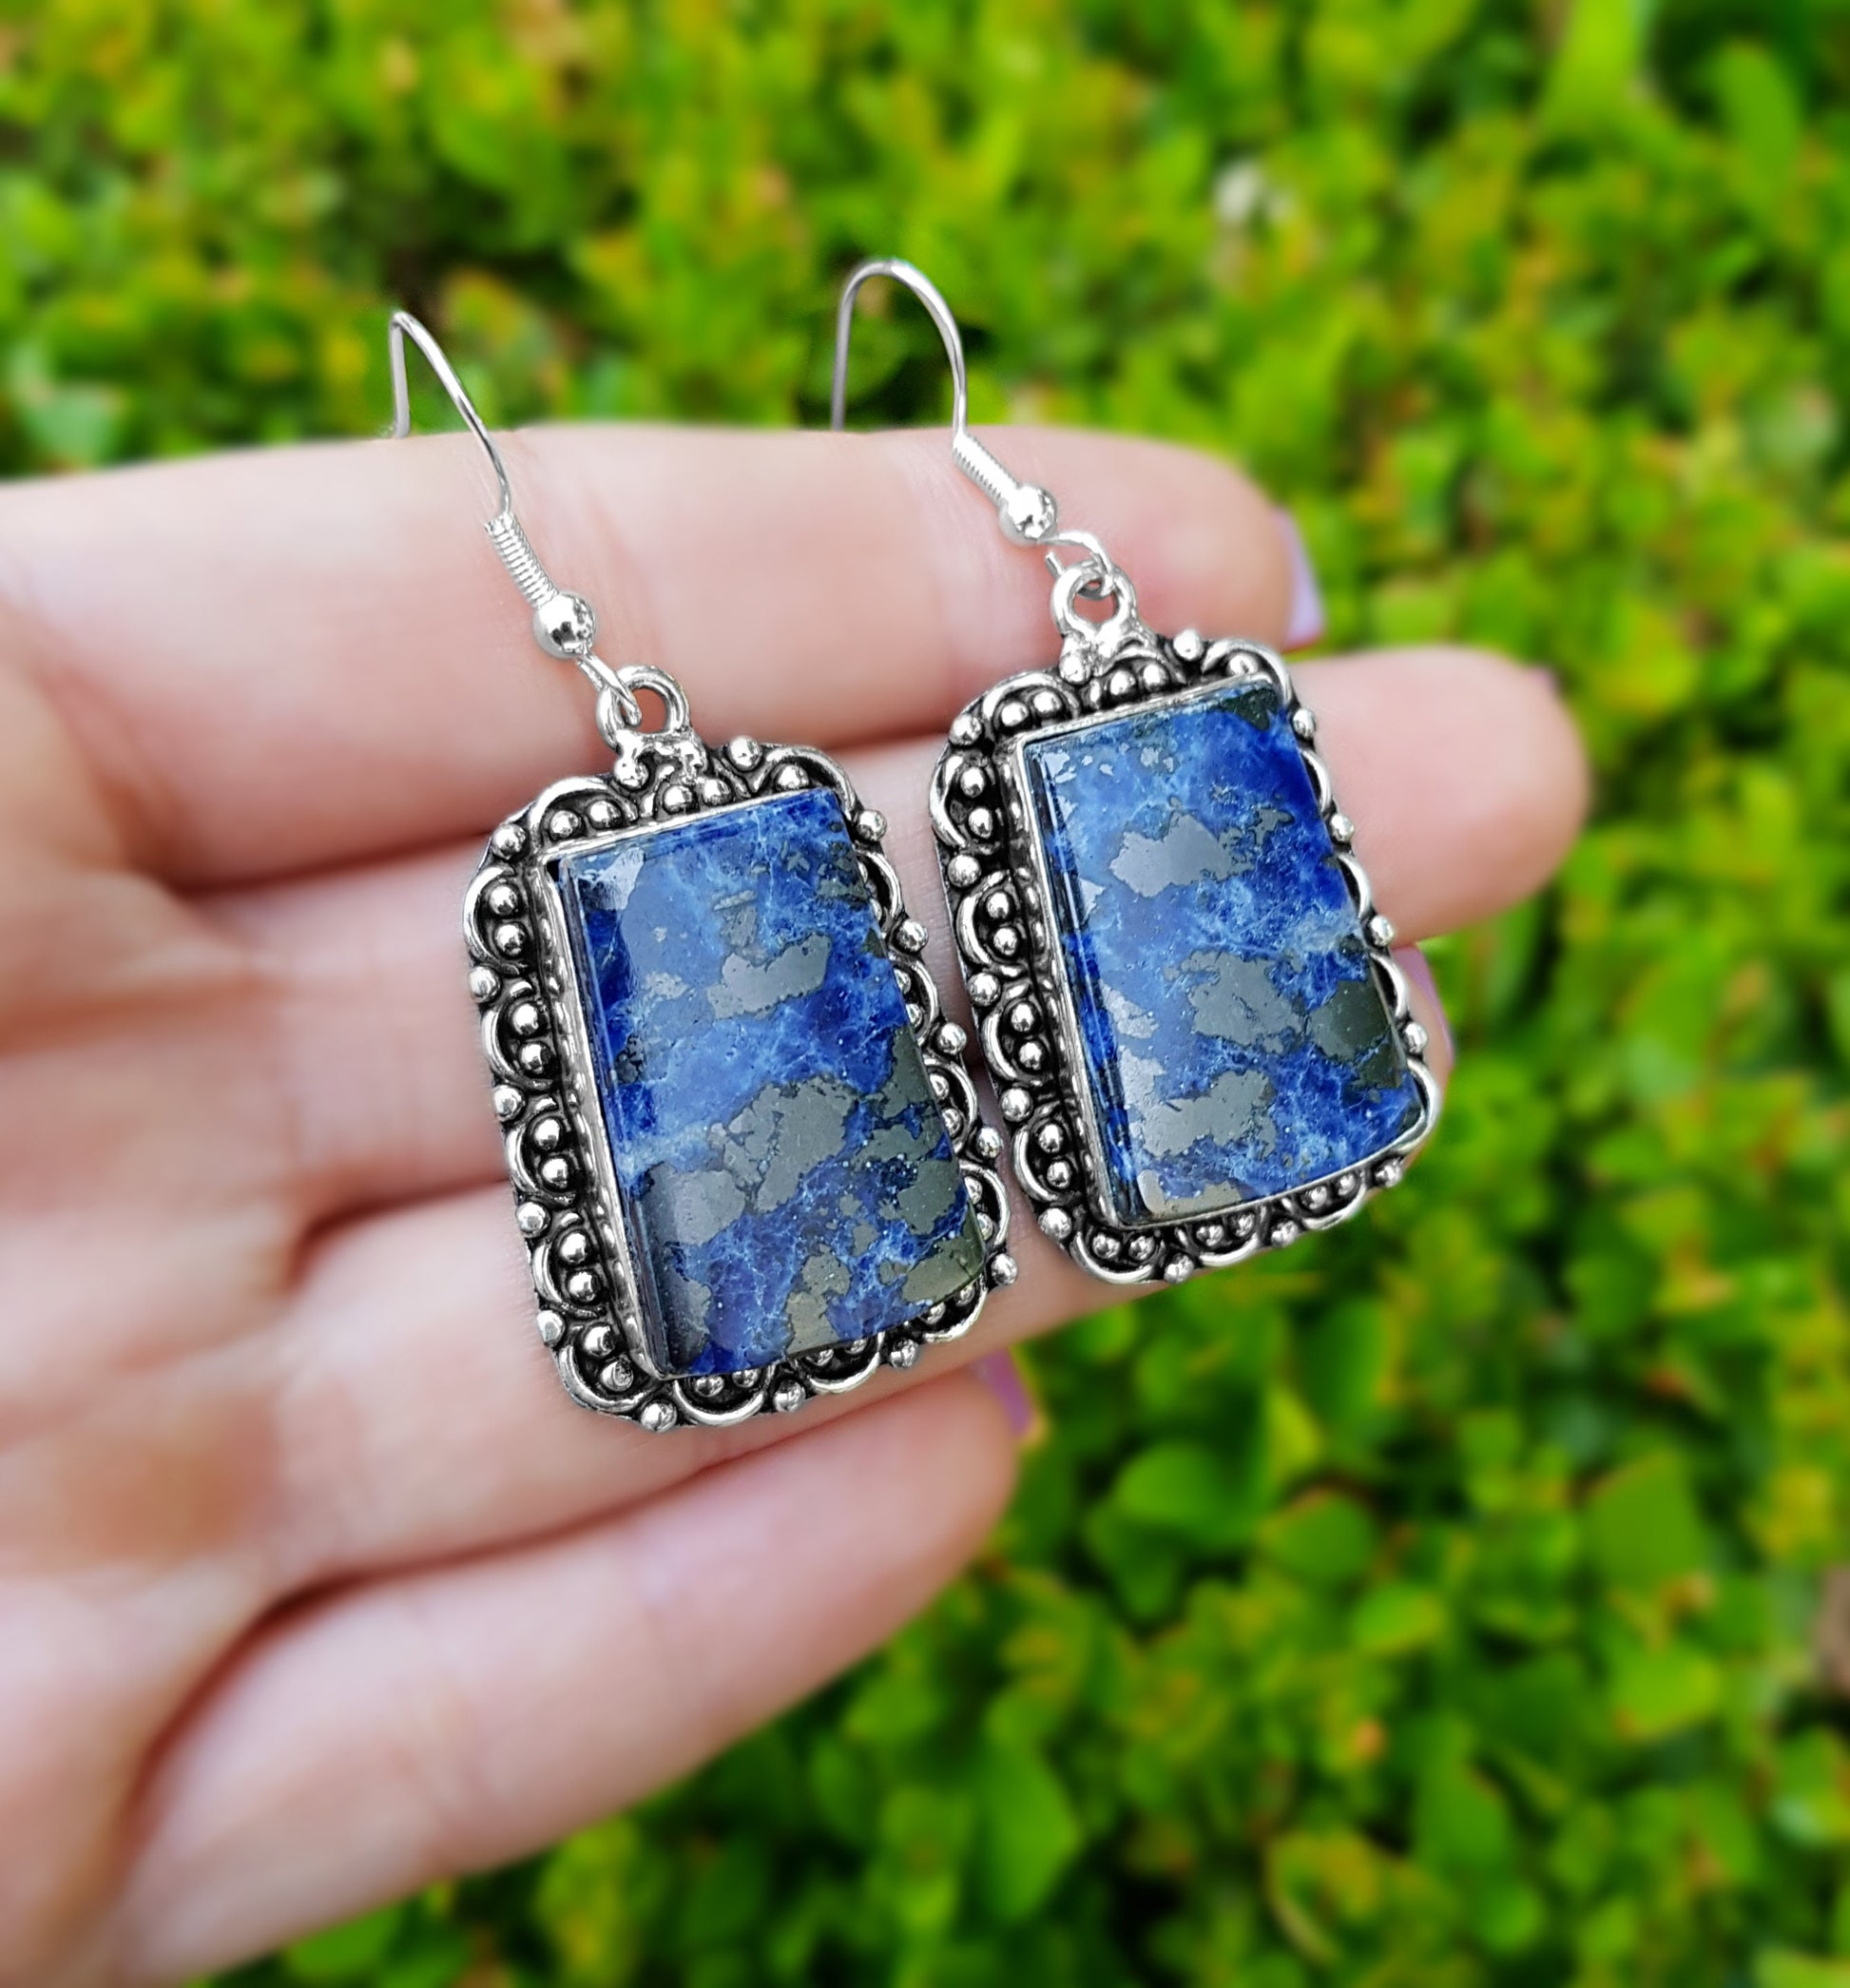 Sodalite Pyrite Earrings In Sterling Silver Dangle Earrings Boho Earrings Ethnic Earrings One Of A Kind Earrings Unique Gift For Her